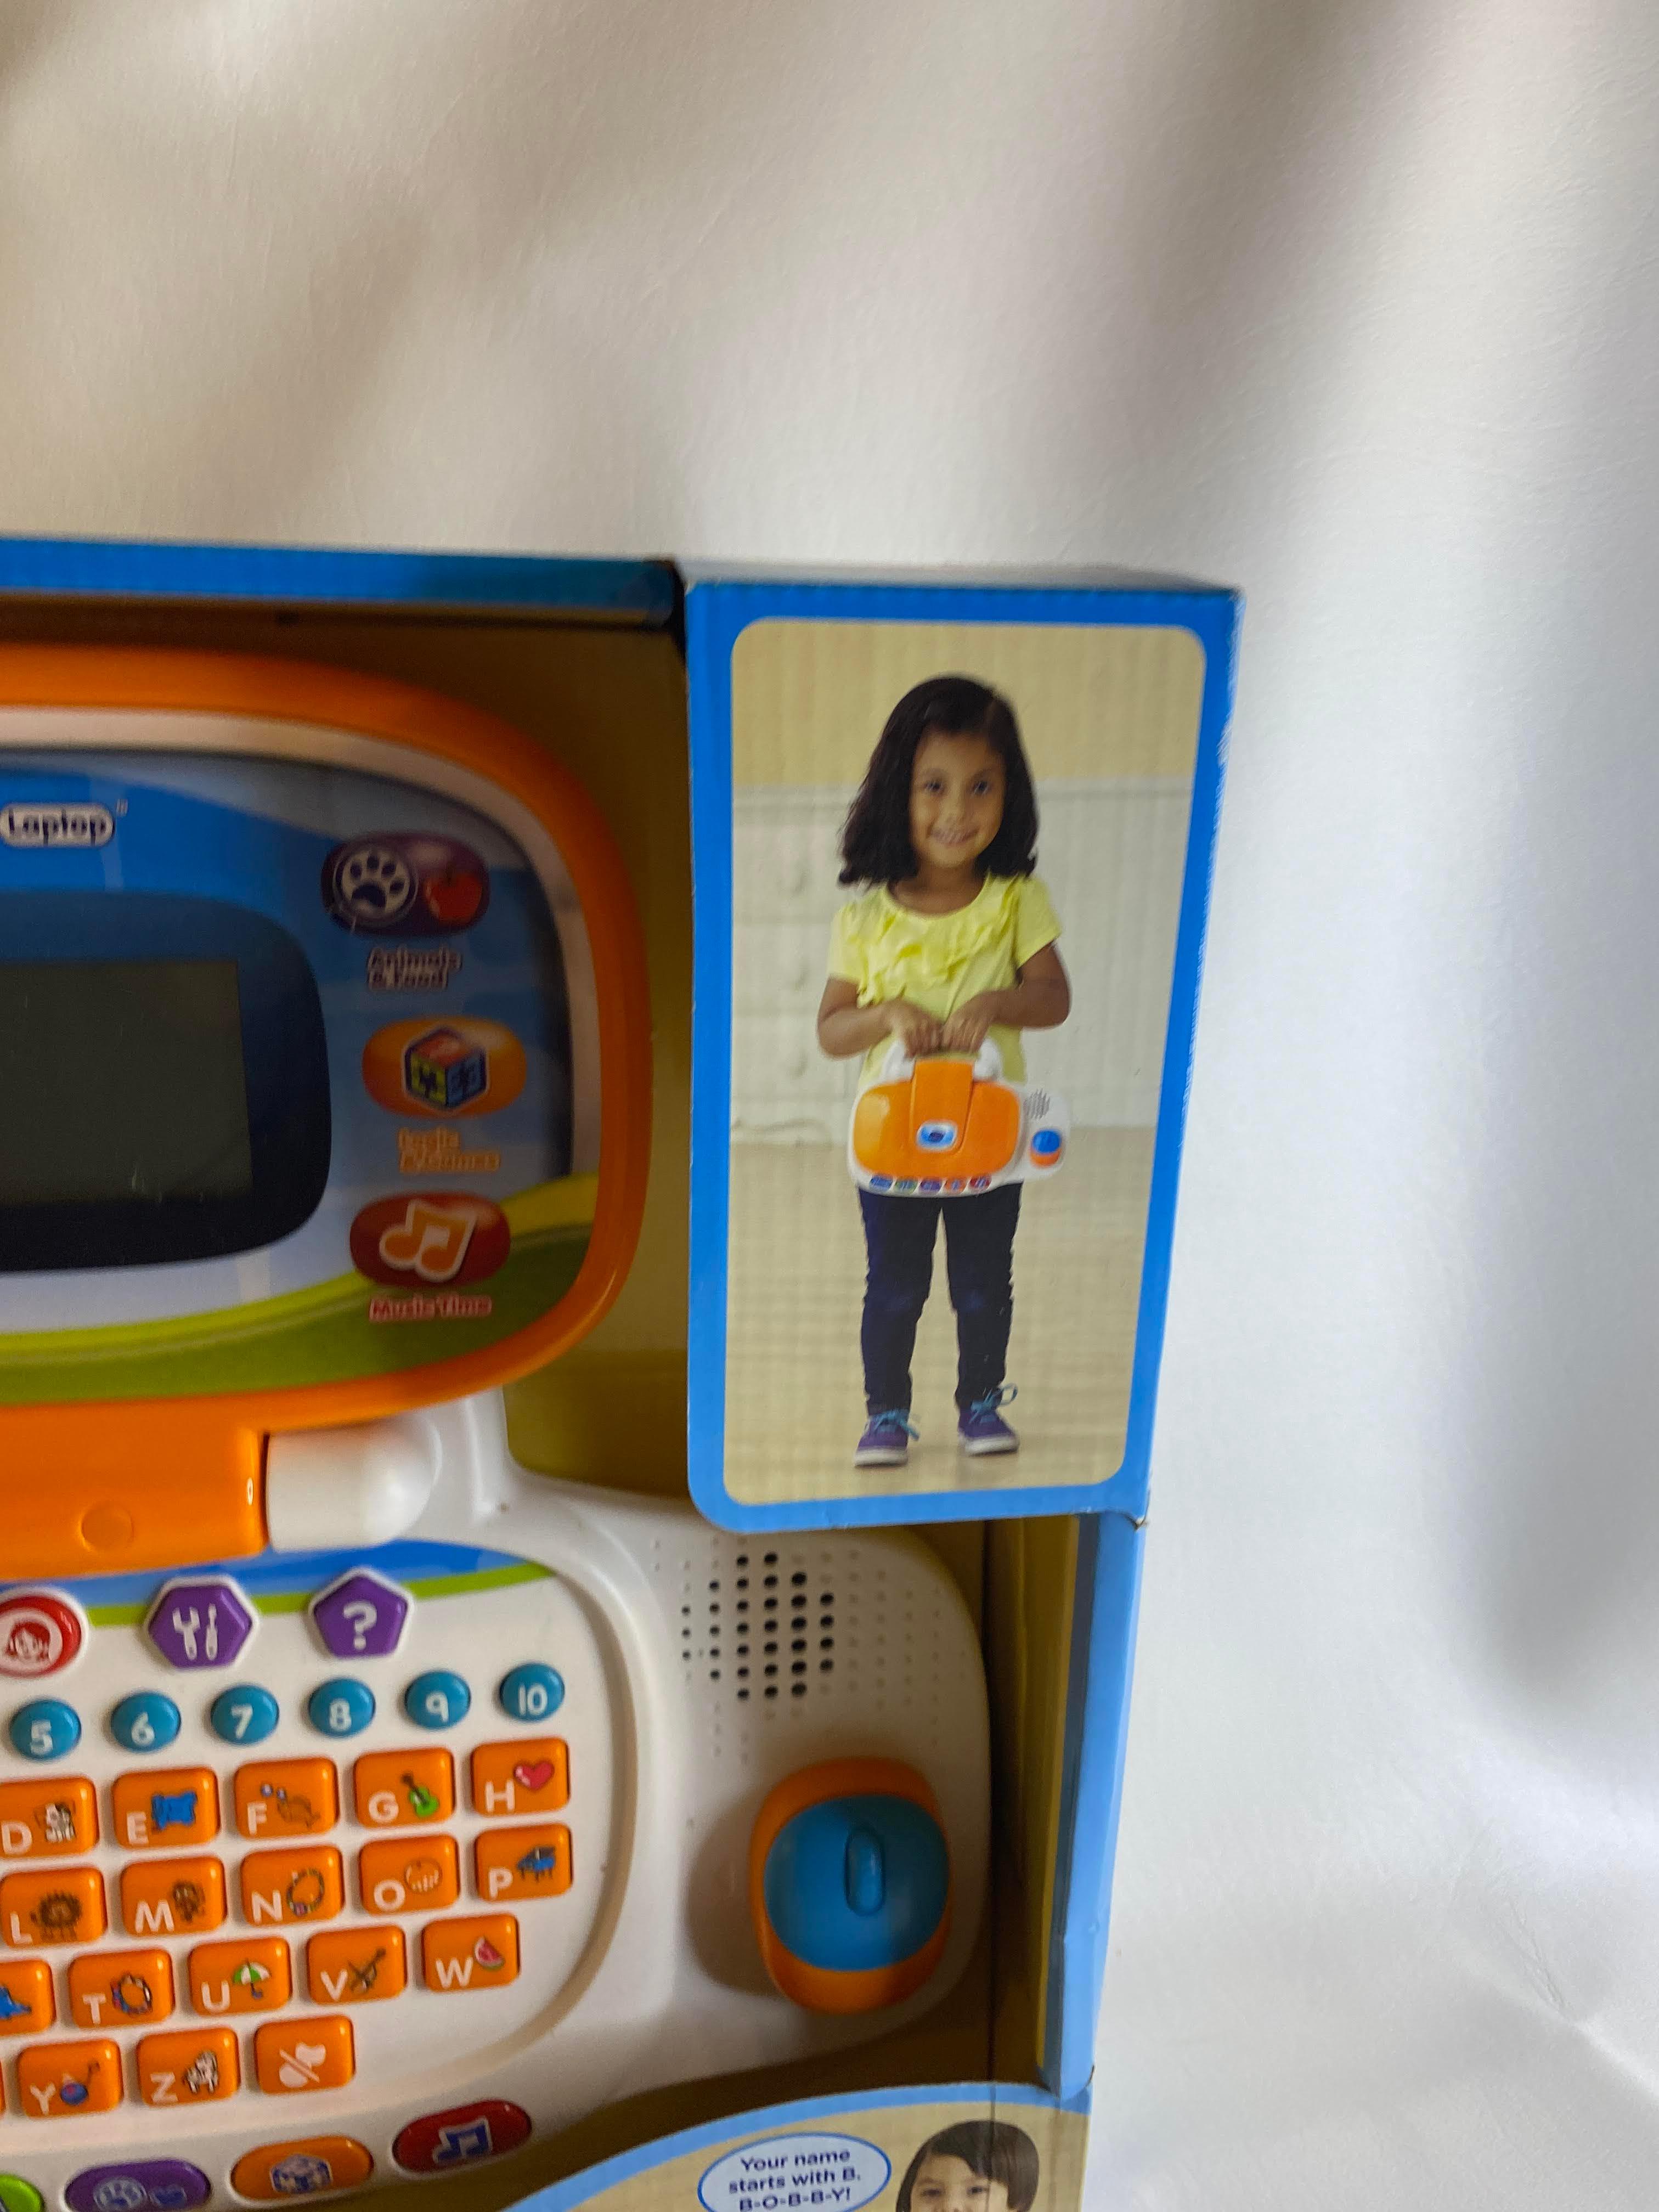 Vtech Tote and GO Learning Laptop